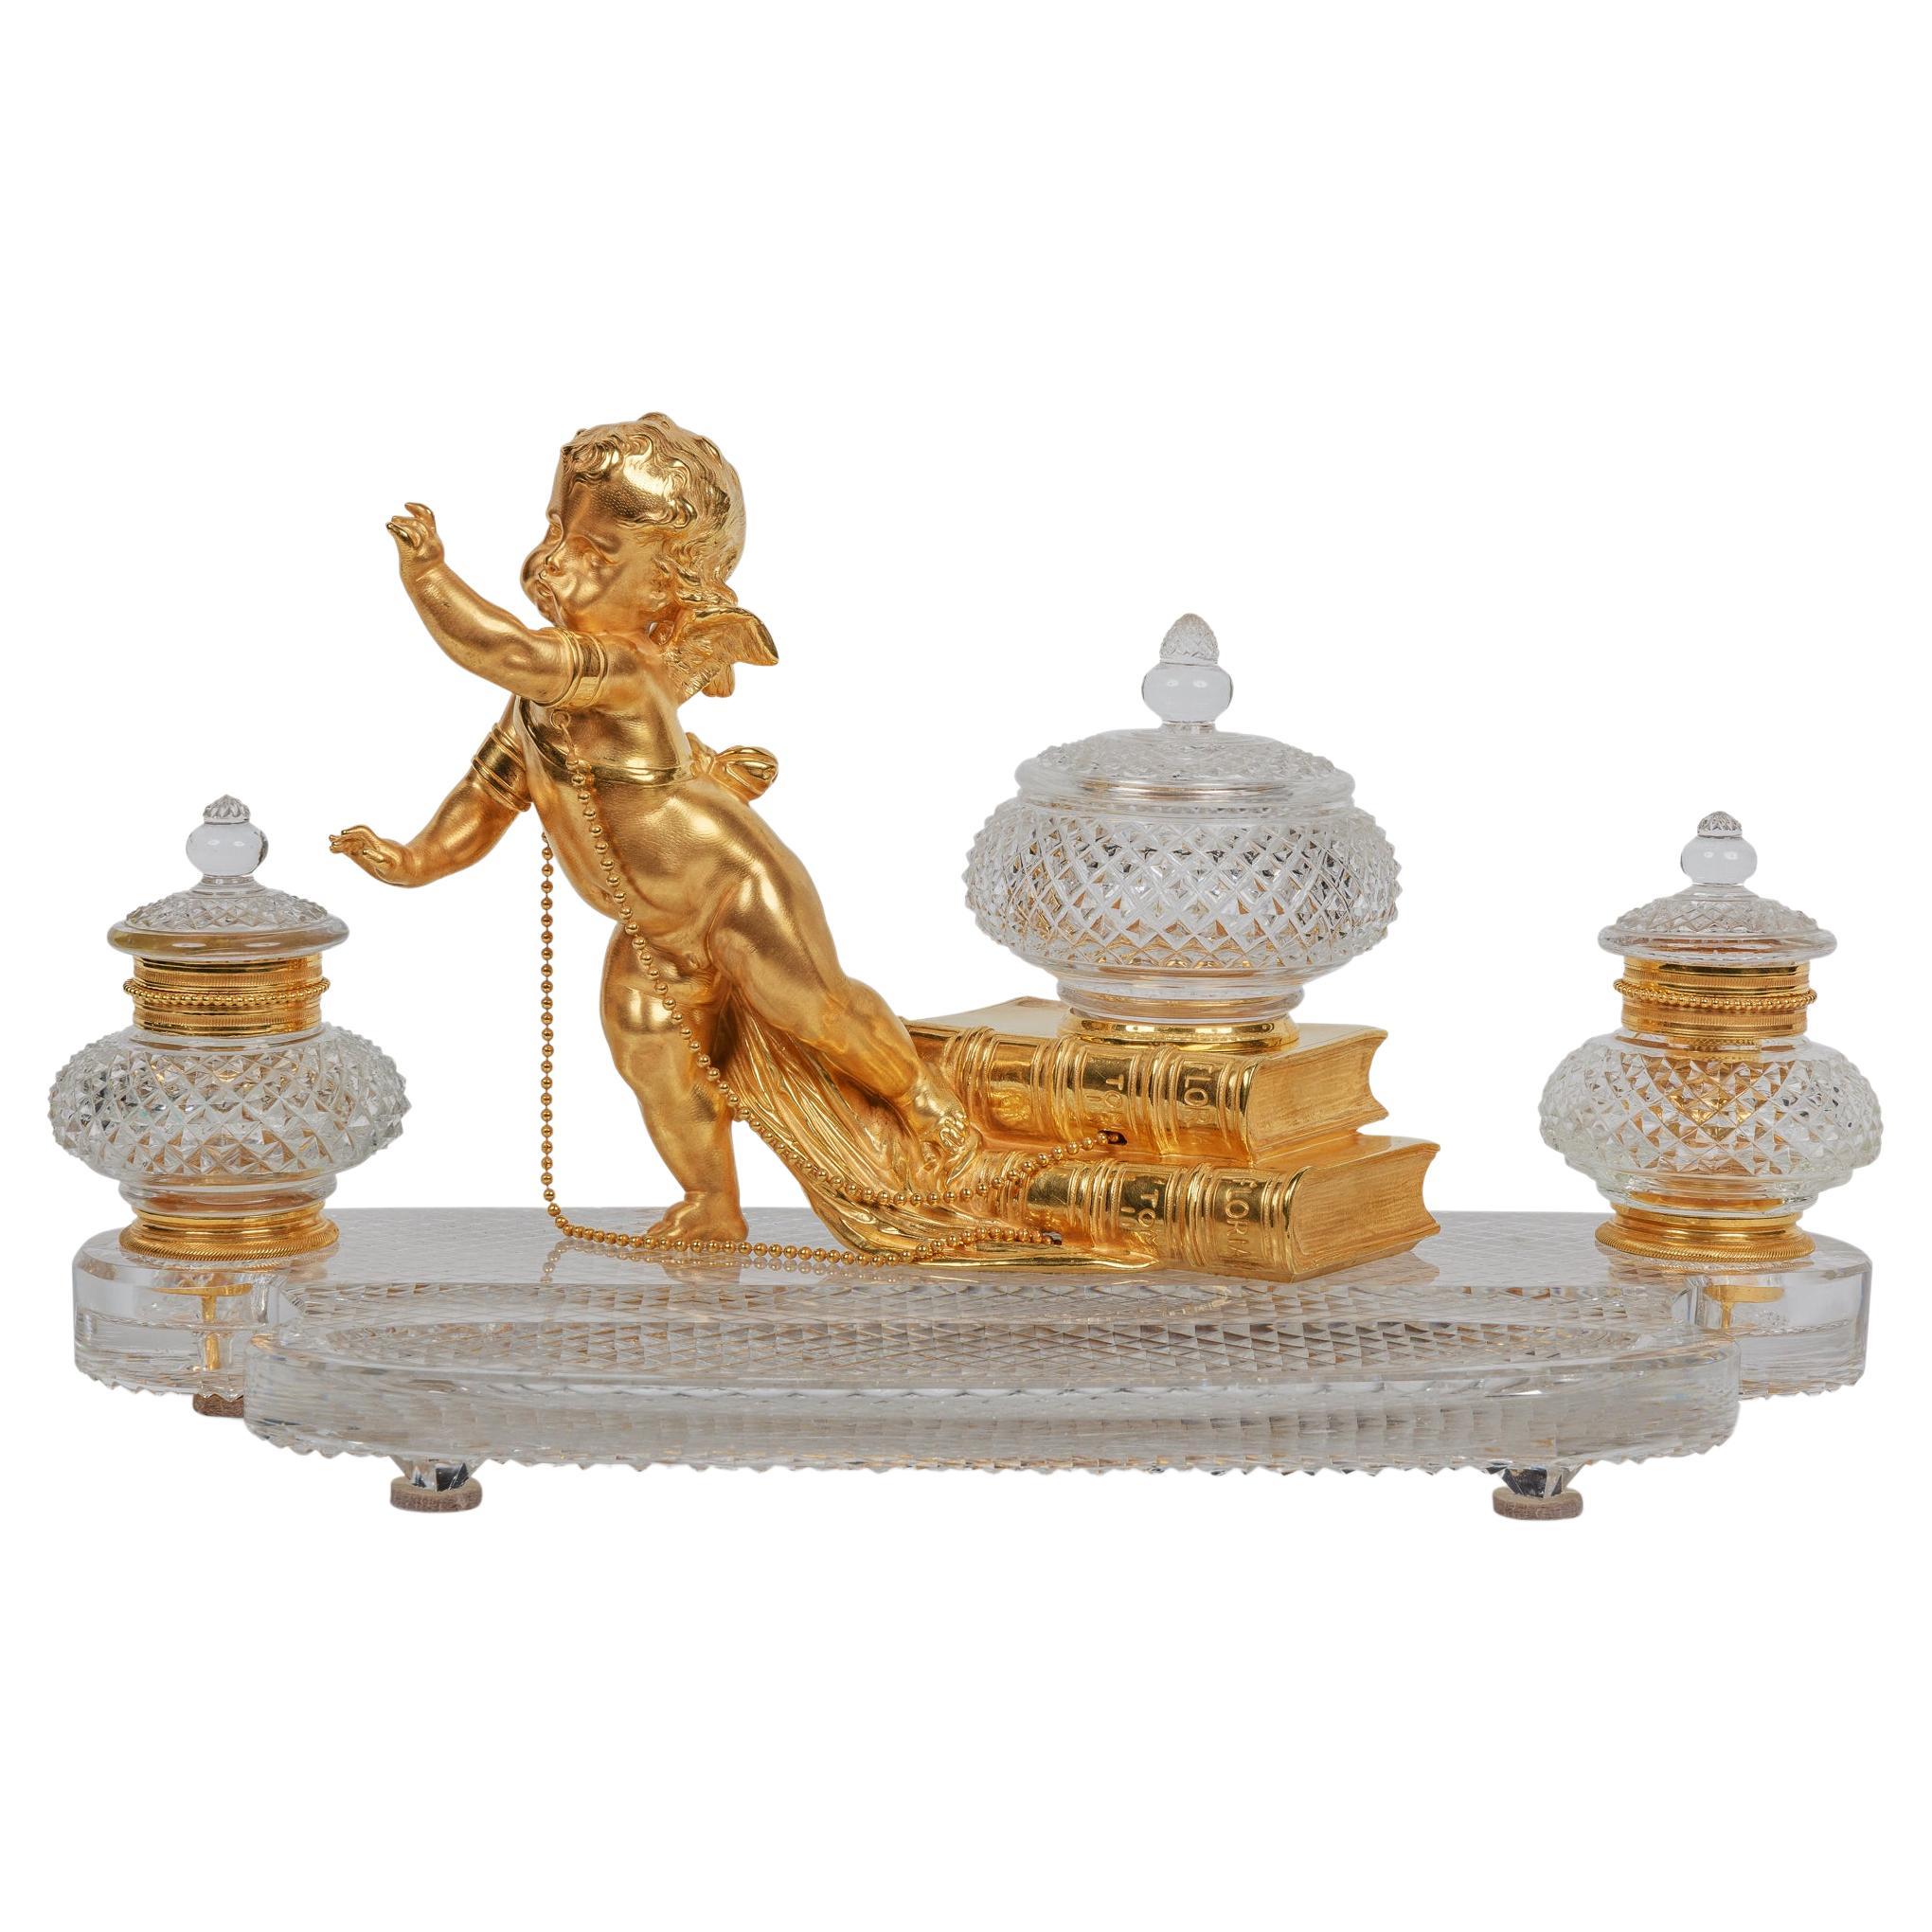 Rare French Ormolu and Diamond-Cut Crystal Figural Inkwell Encrier by Baccarat For Sale